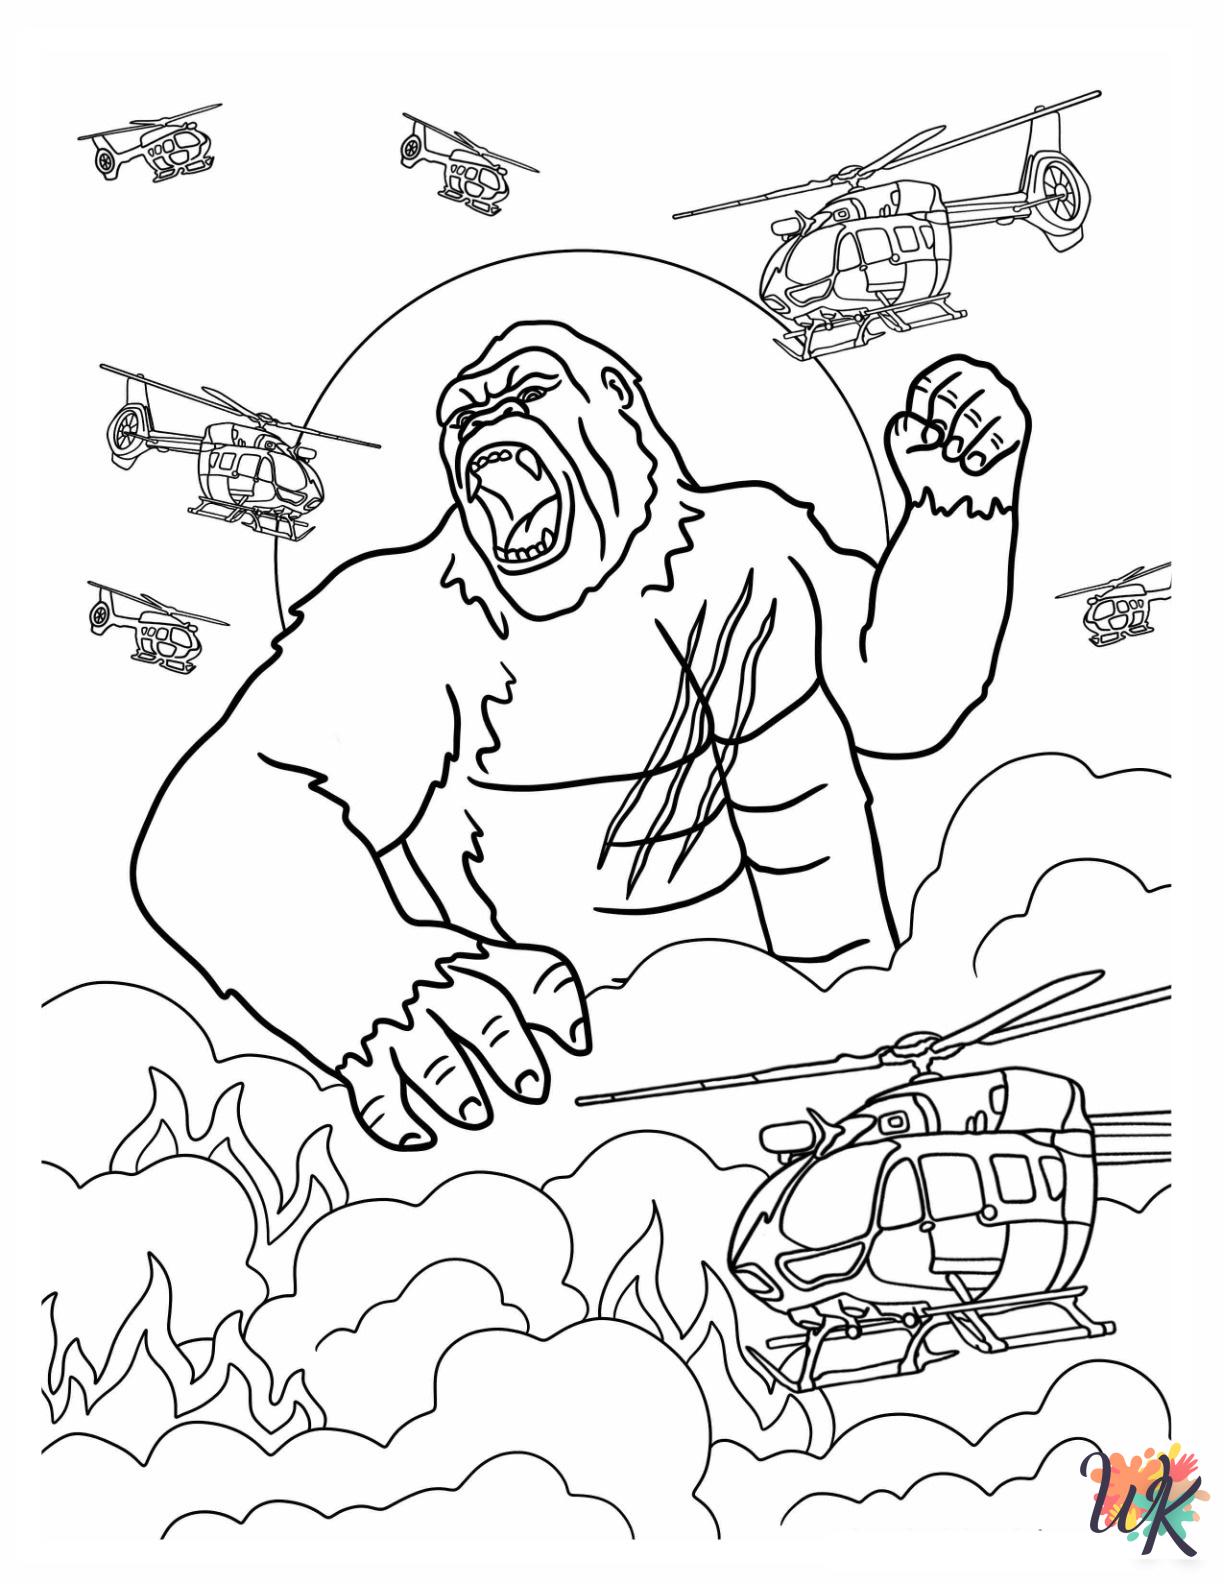 King Kong adult coloring pages